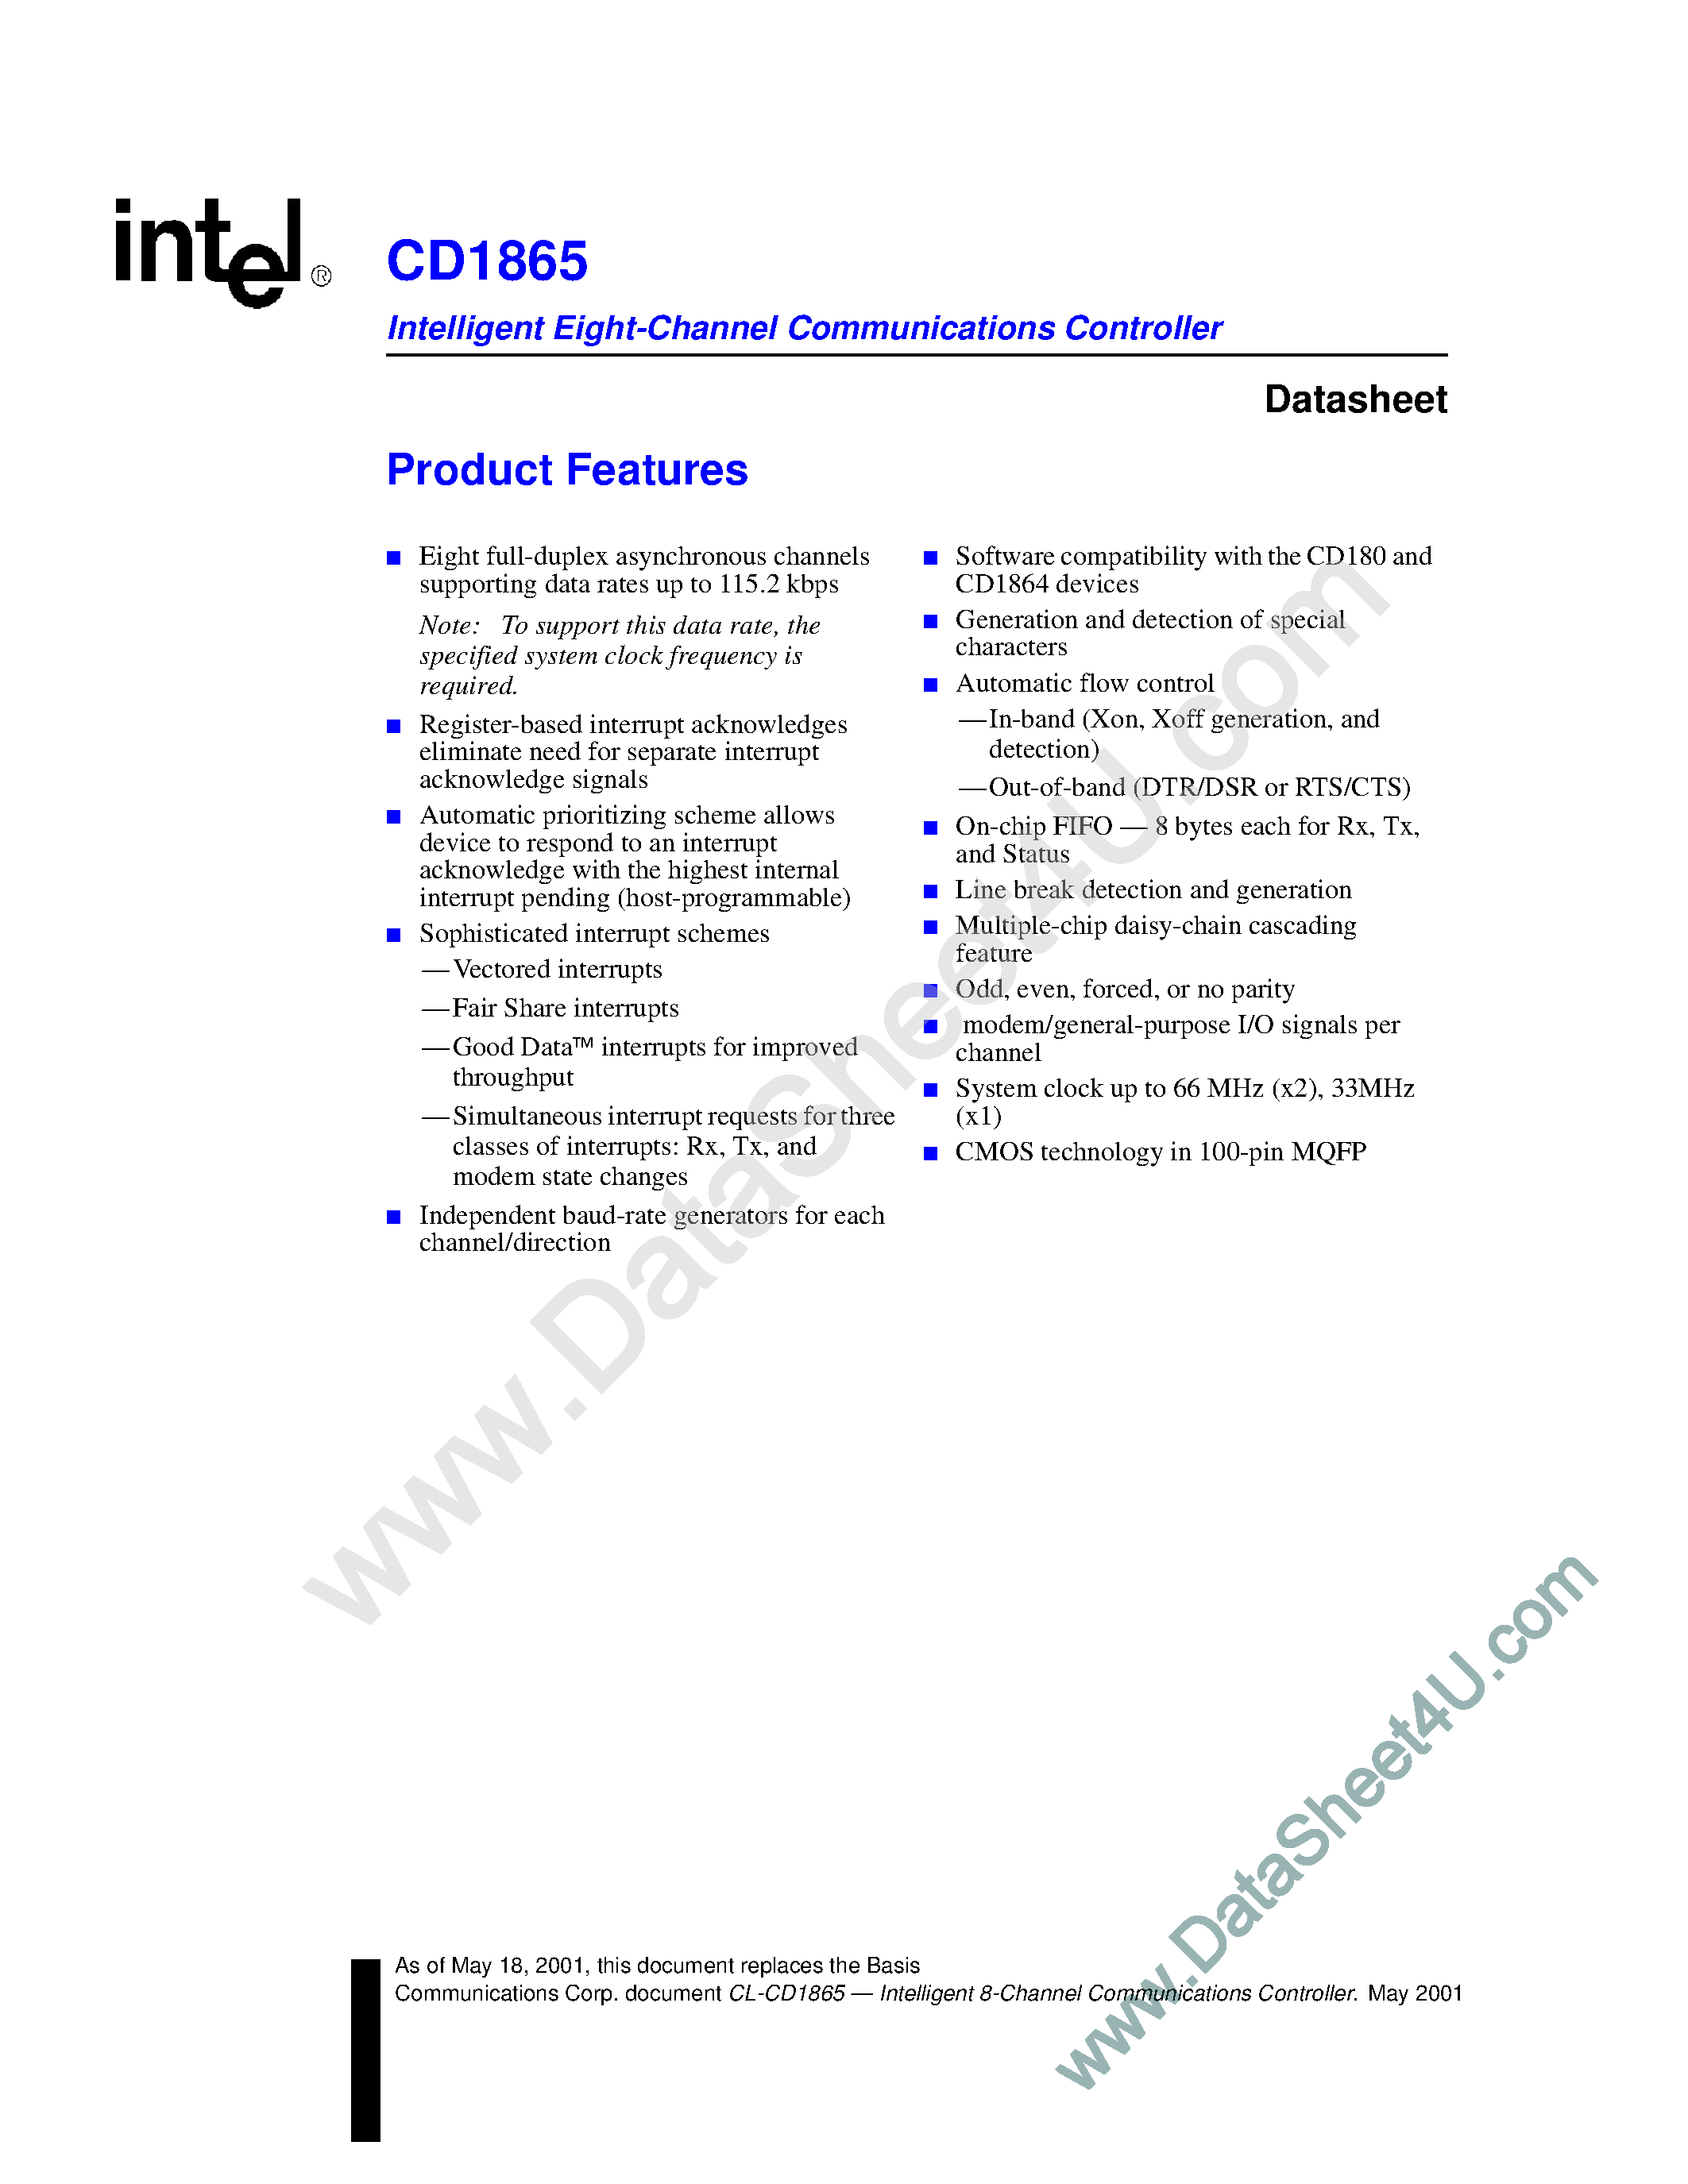 Datasheet CD1865 - Intelligent Eight-channel Communications Controller page 1